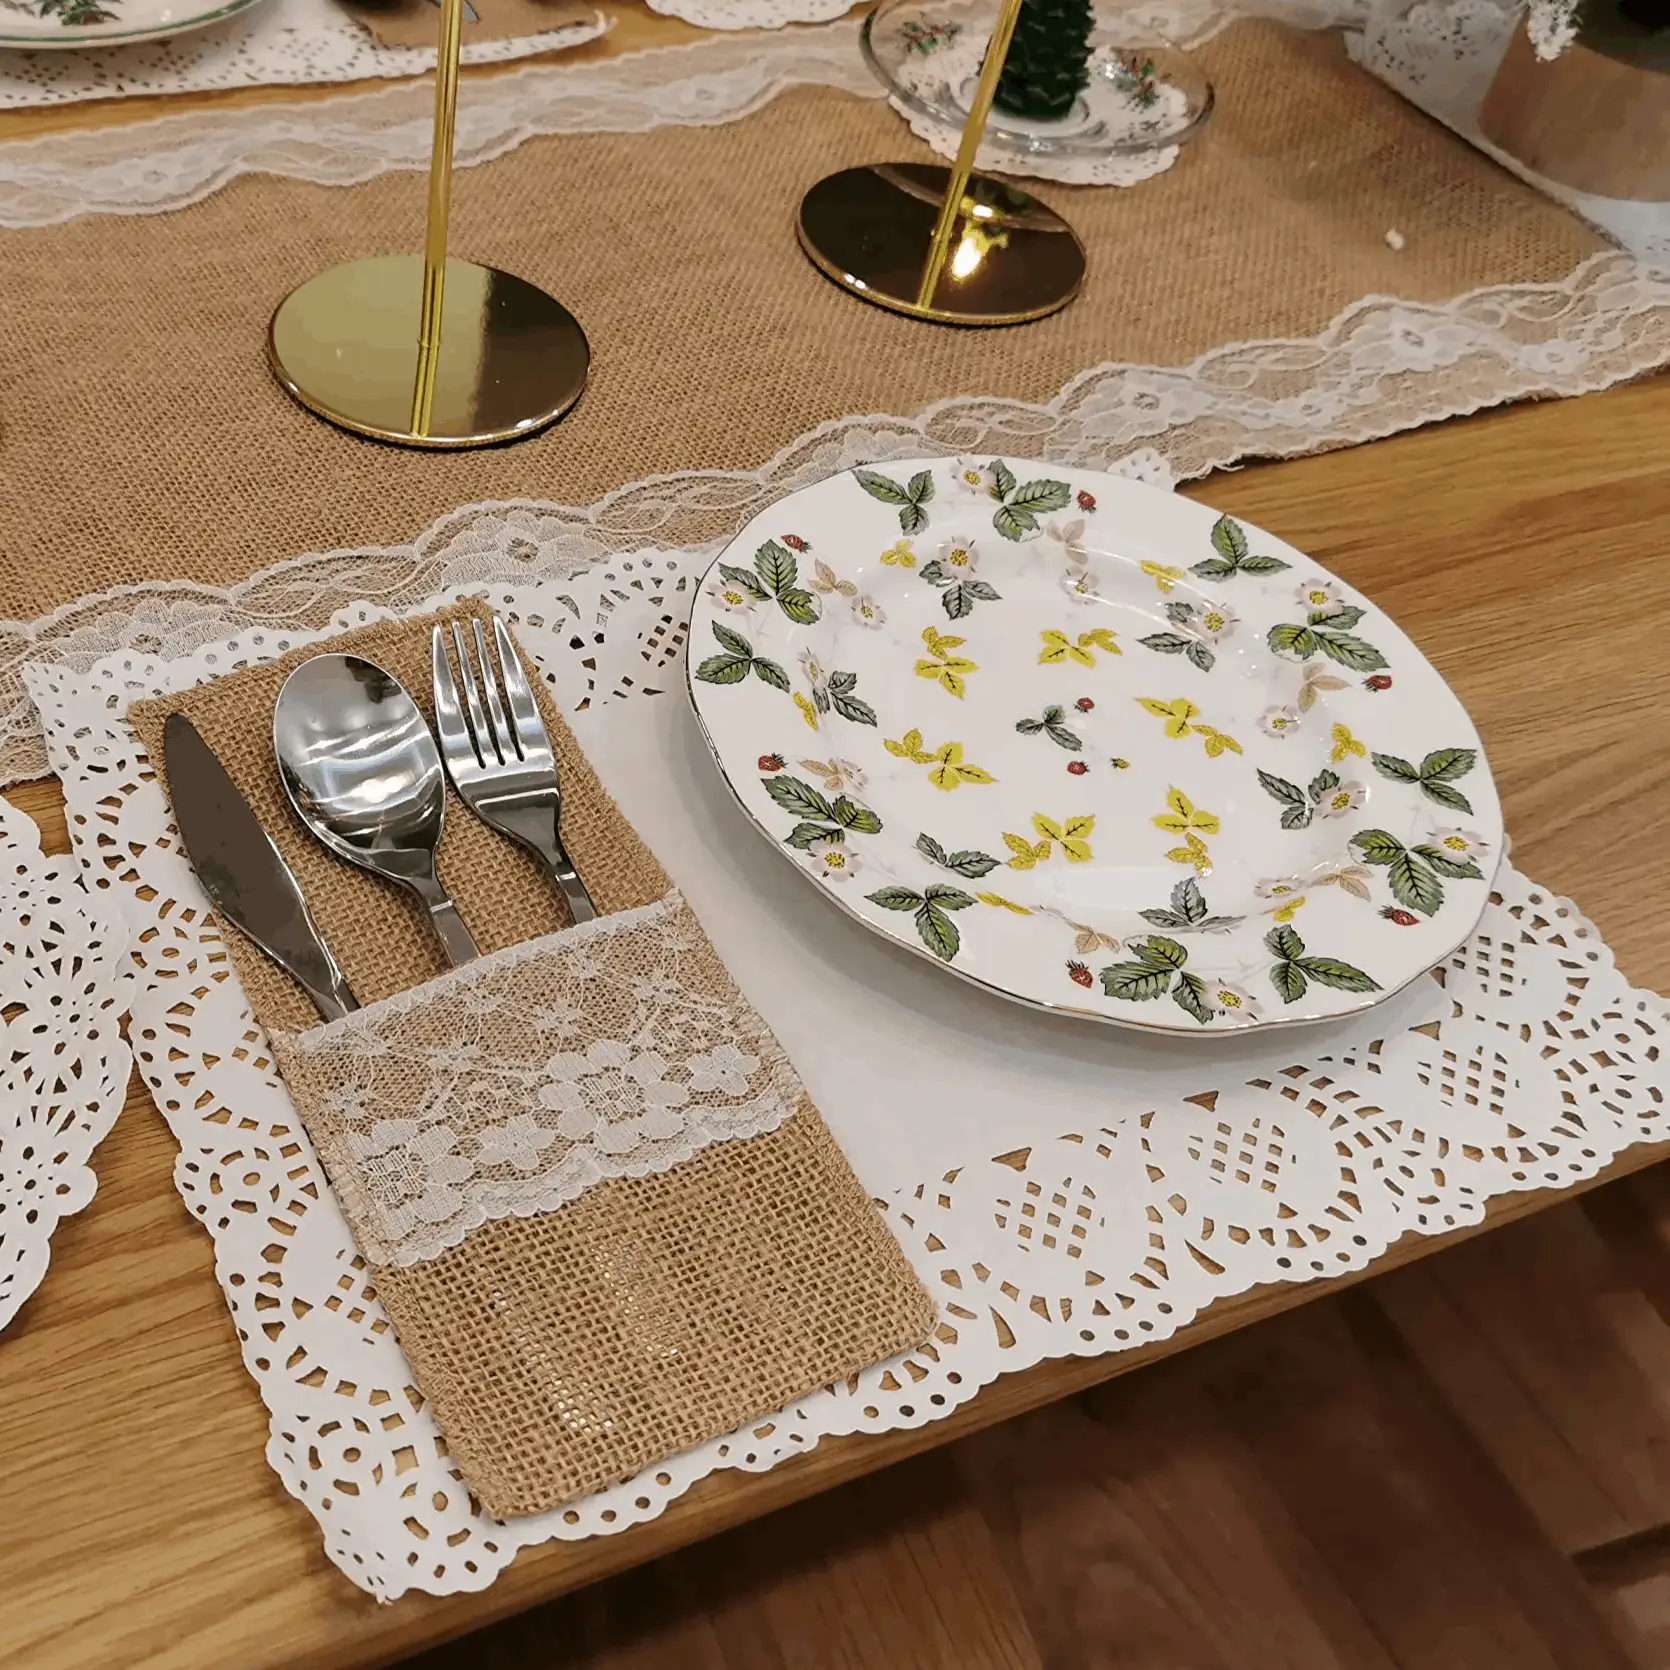 a table set with place settings and place mats